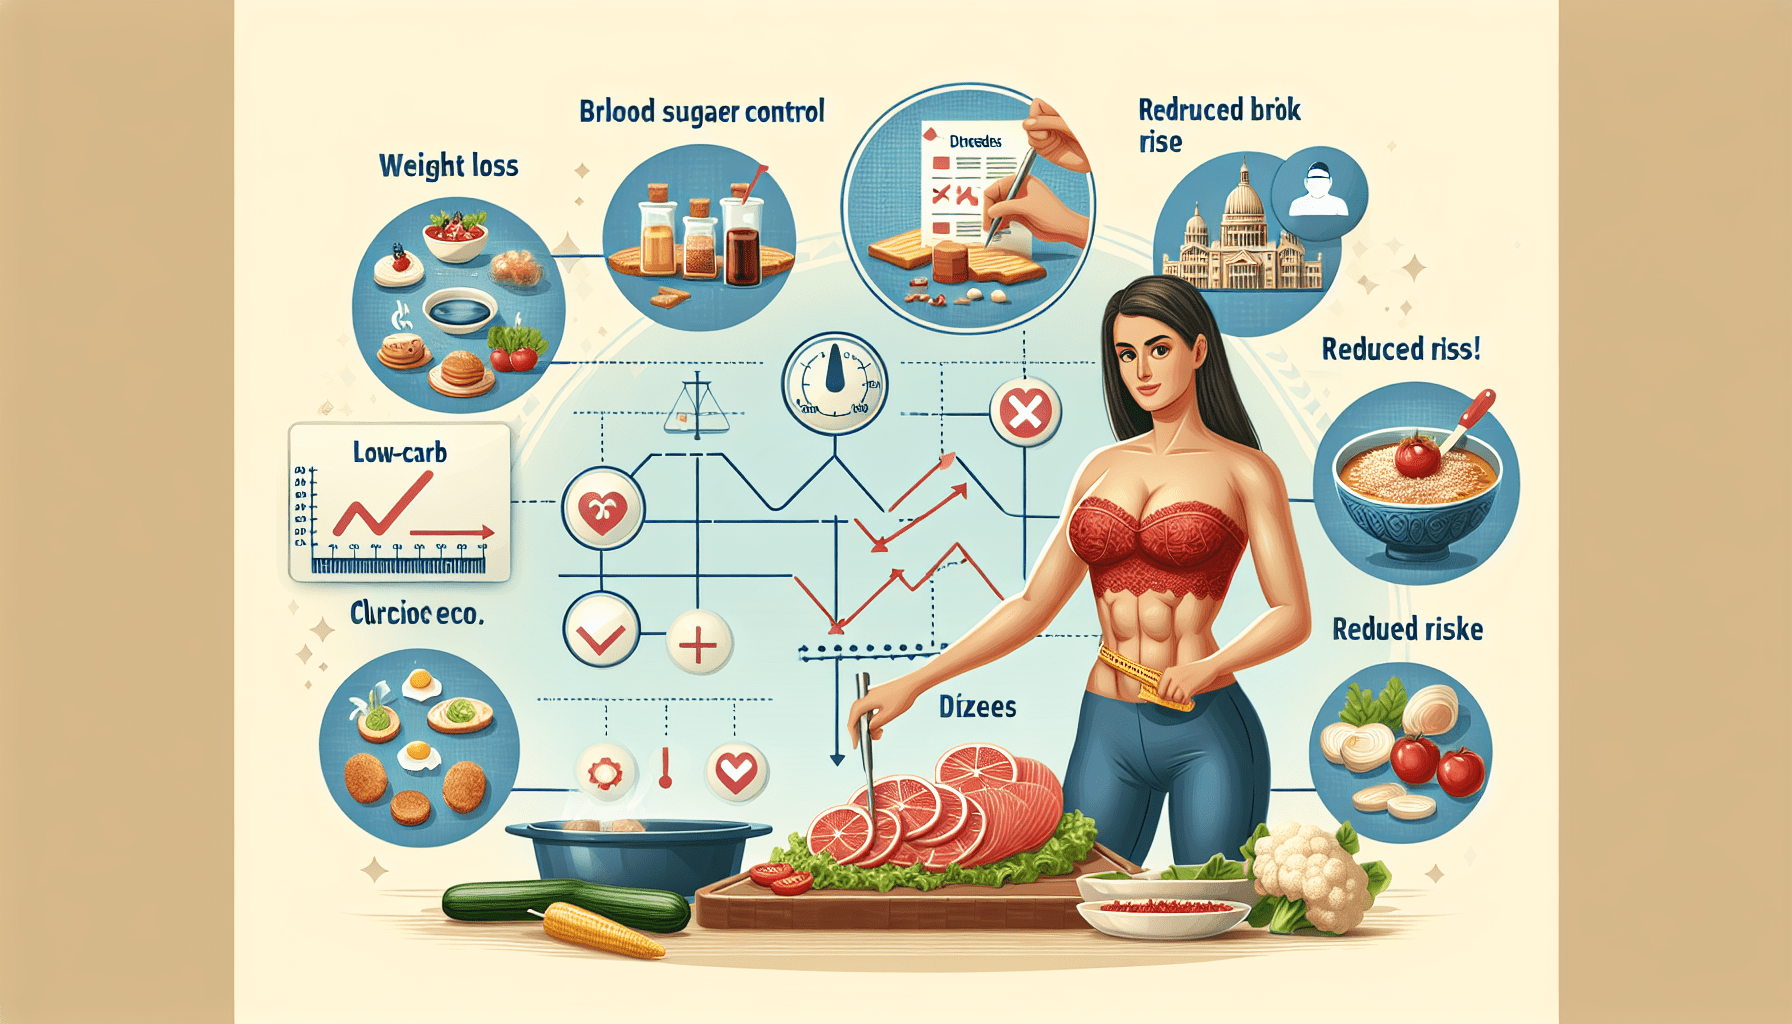 The Benefits of a Low-Carb Diet